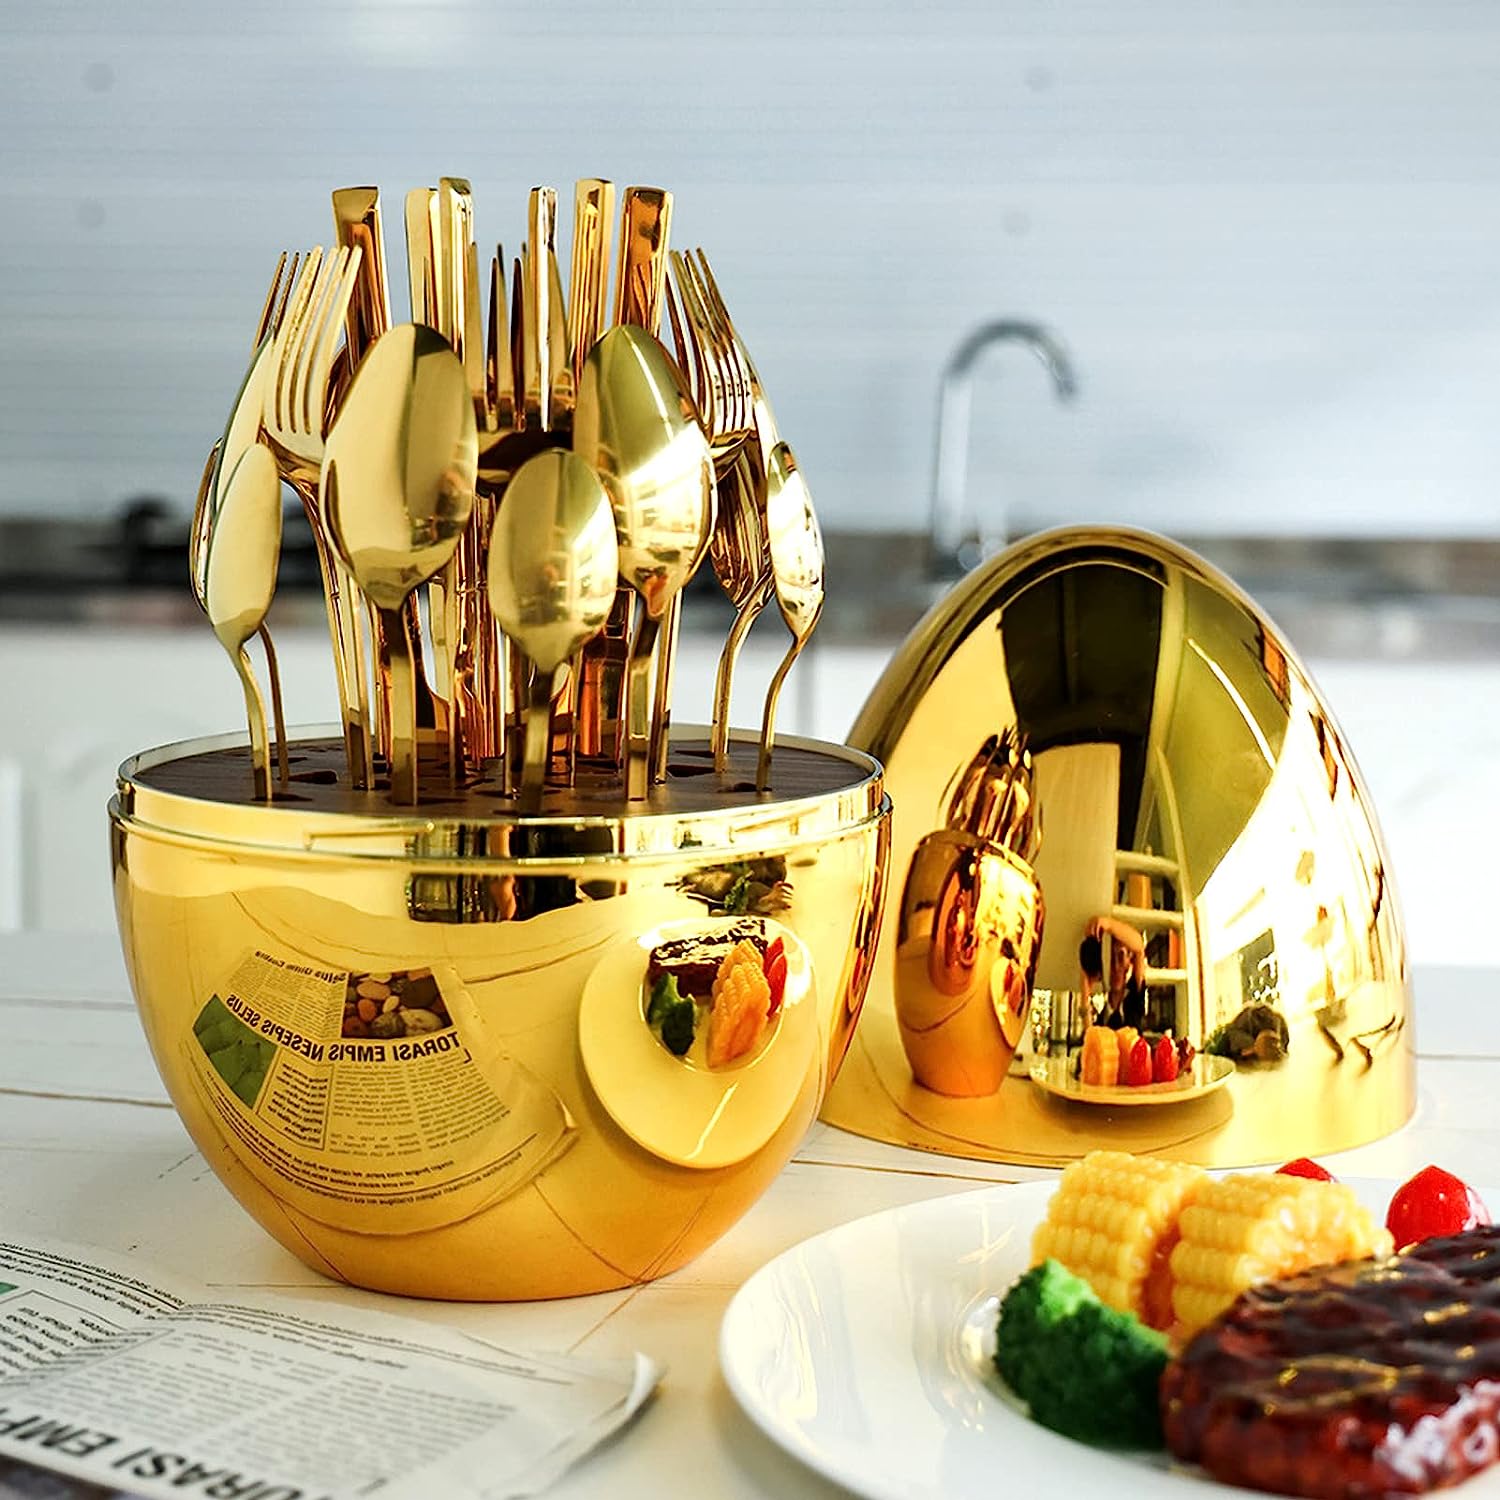 Egg-Shaped Cutlery Organizer with Storage in golden color